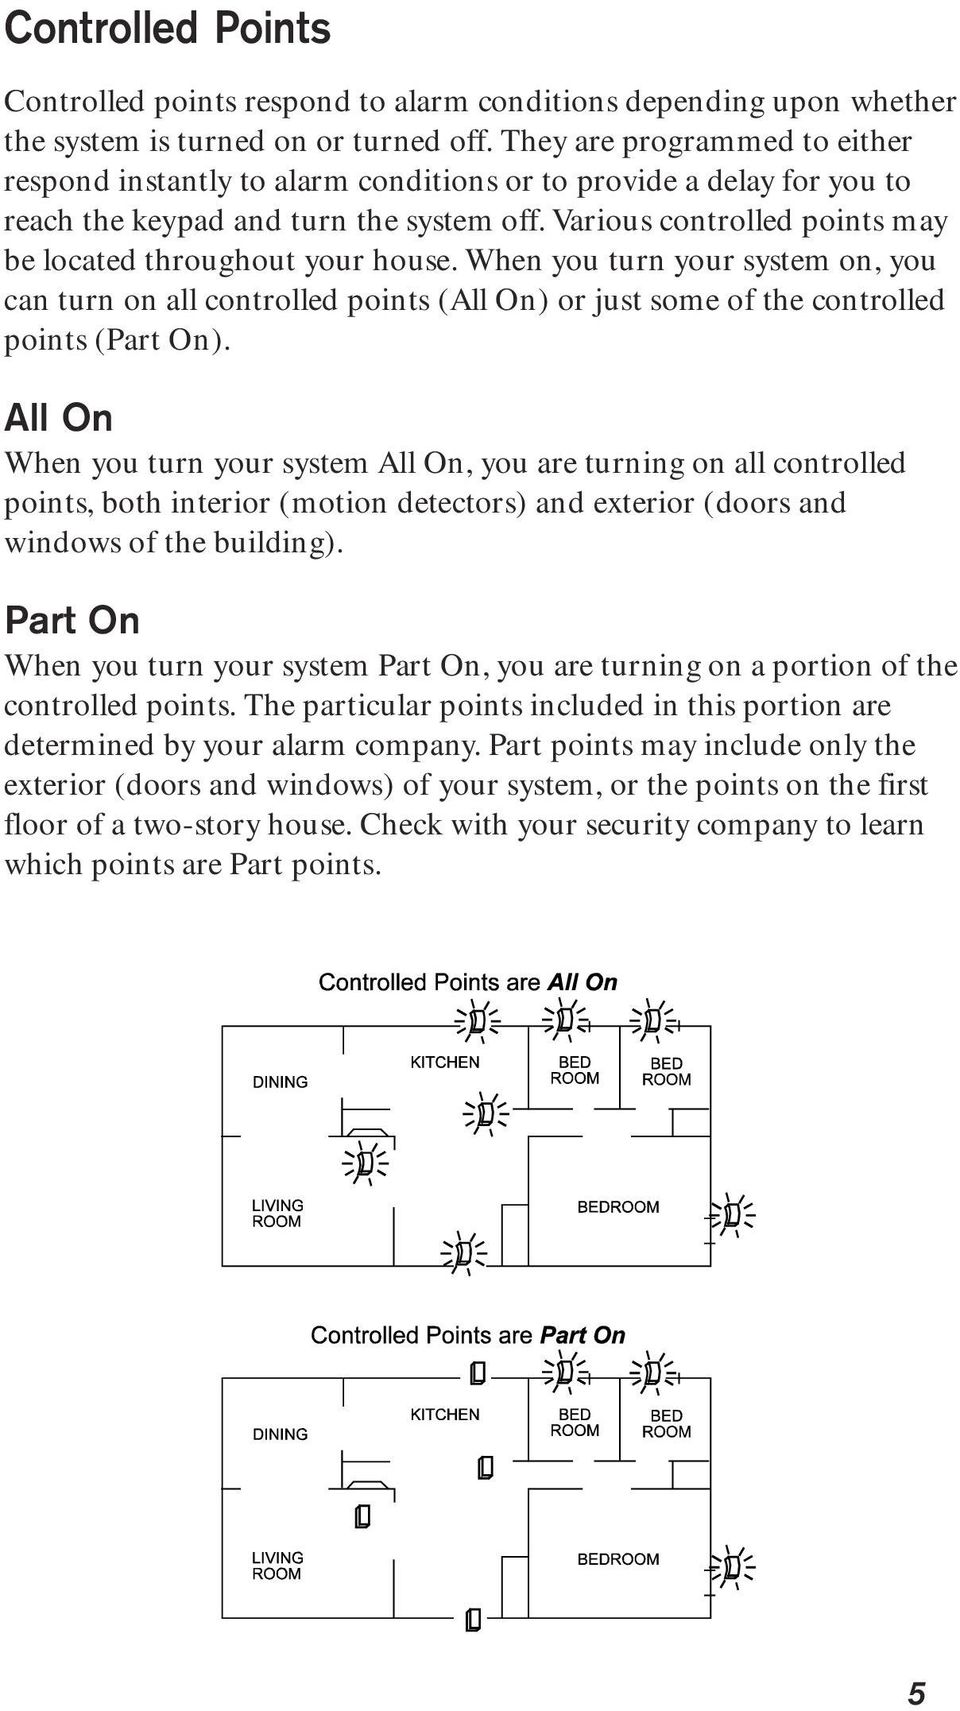 Various controlled points may be located throughout your house. When you turn your system on, you can turn on all controlled points (All On) or just some of the controlled points (Part On).